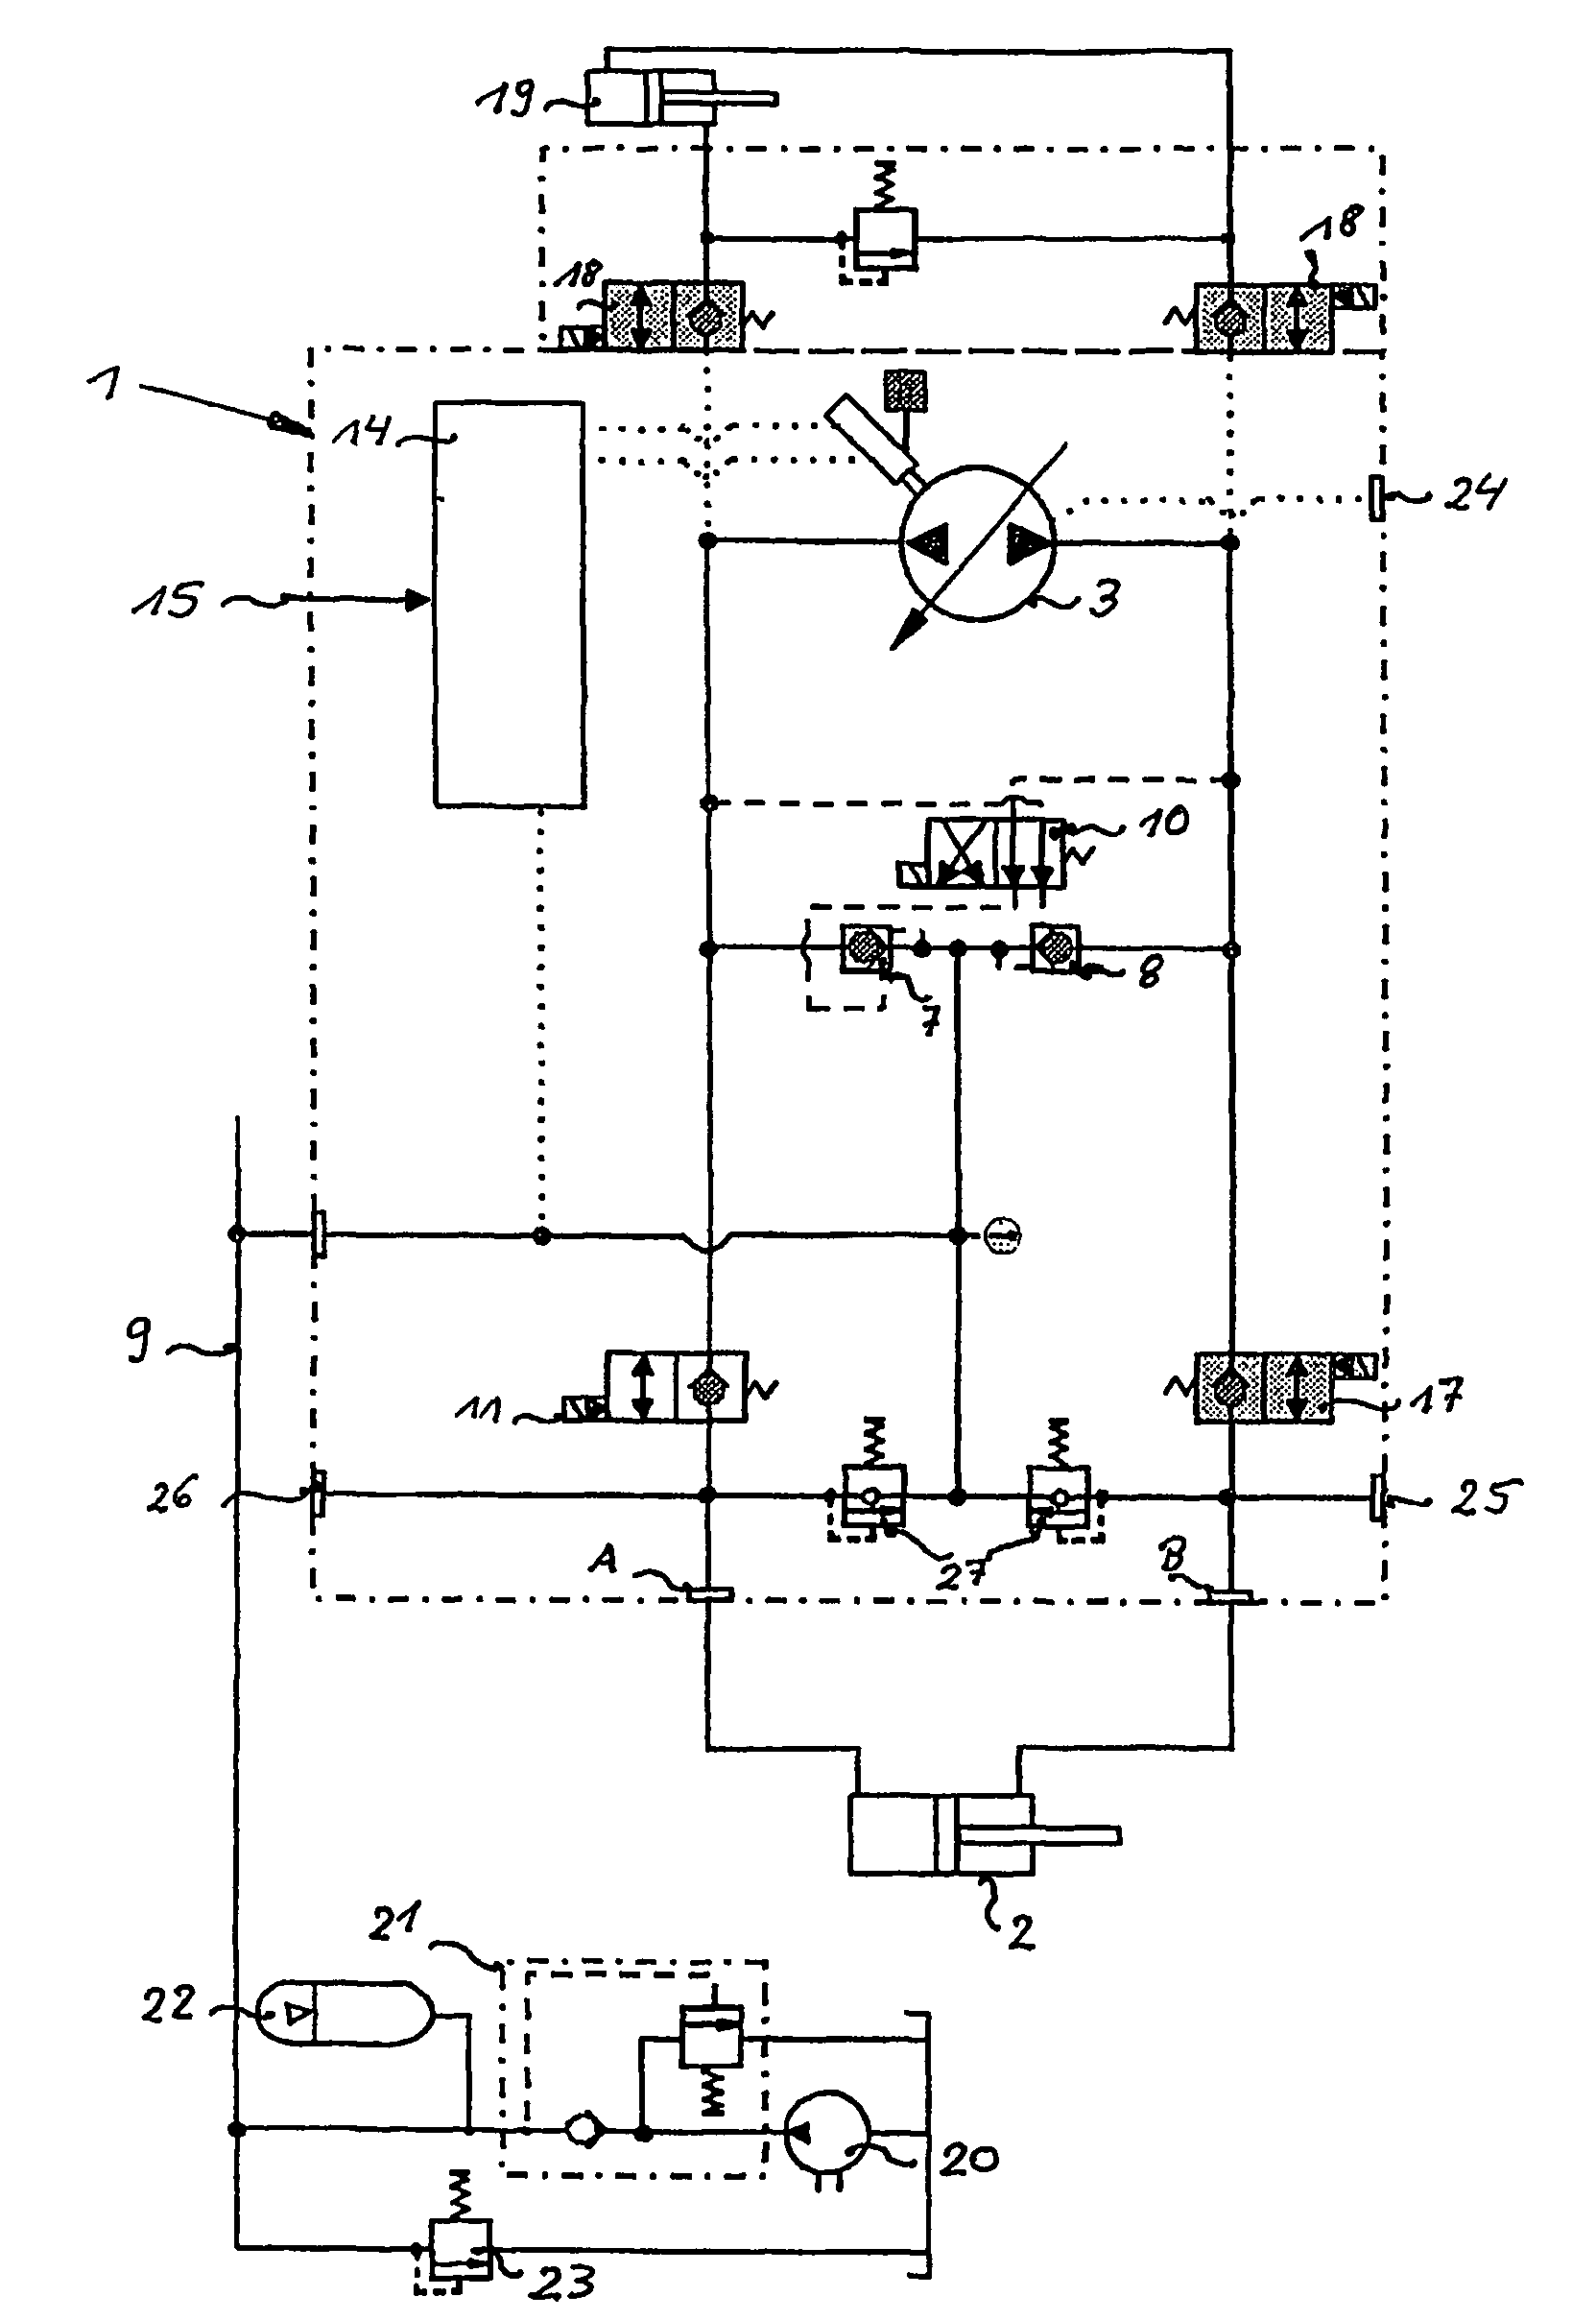 Hydraulic system for linear drives controlled by a displacer element